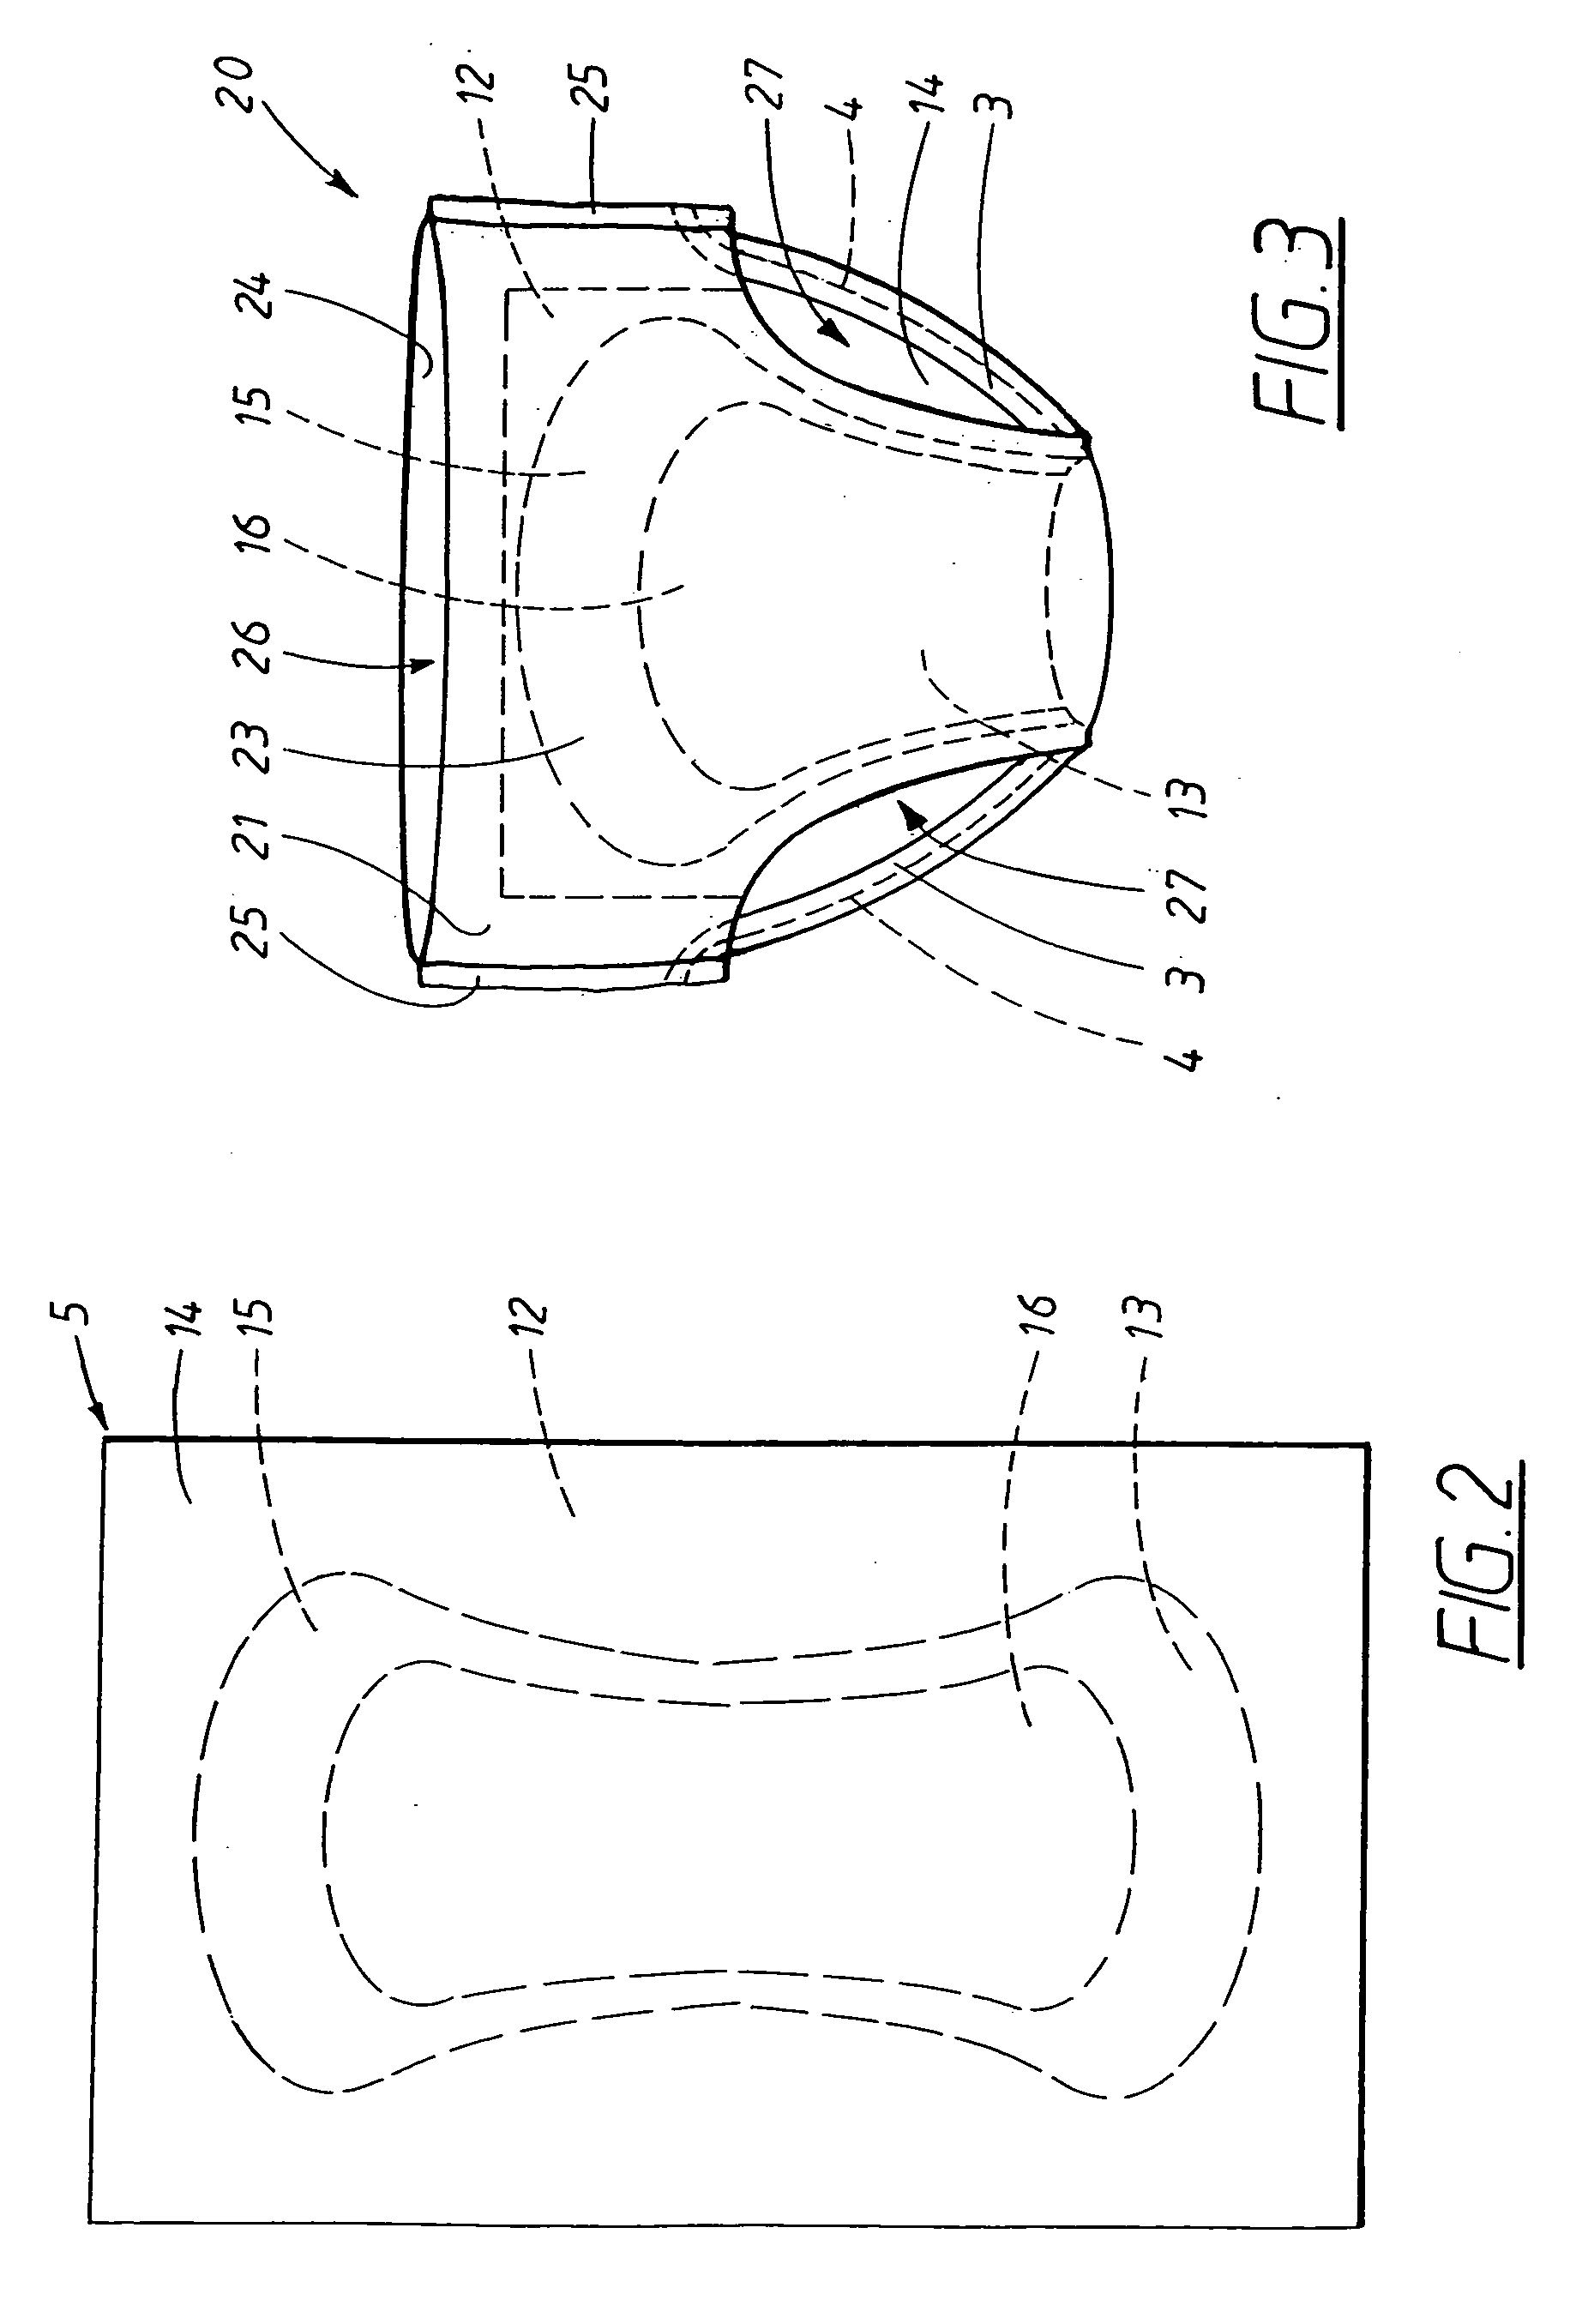 Method for applying elastic members on a pant-shaped absorbent article